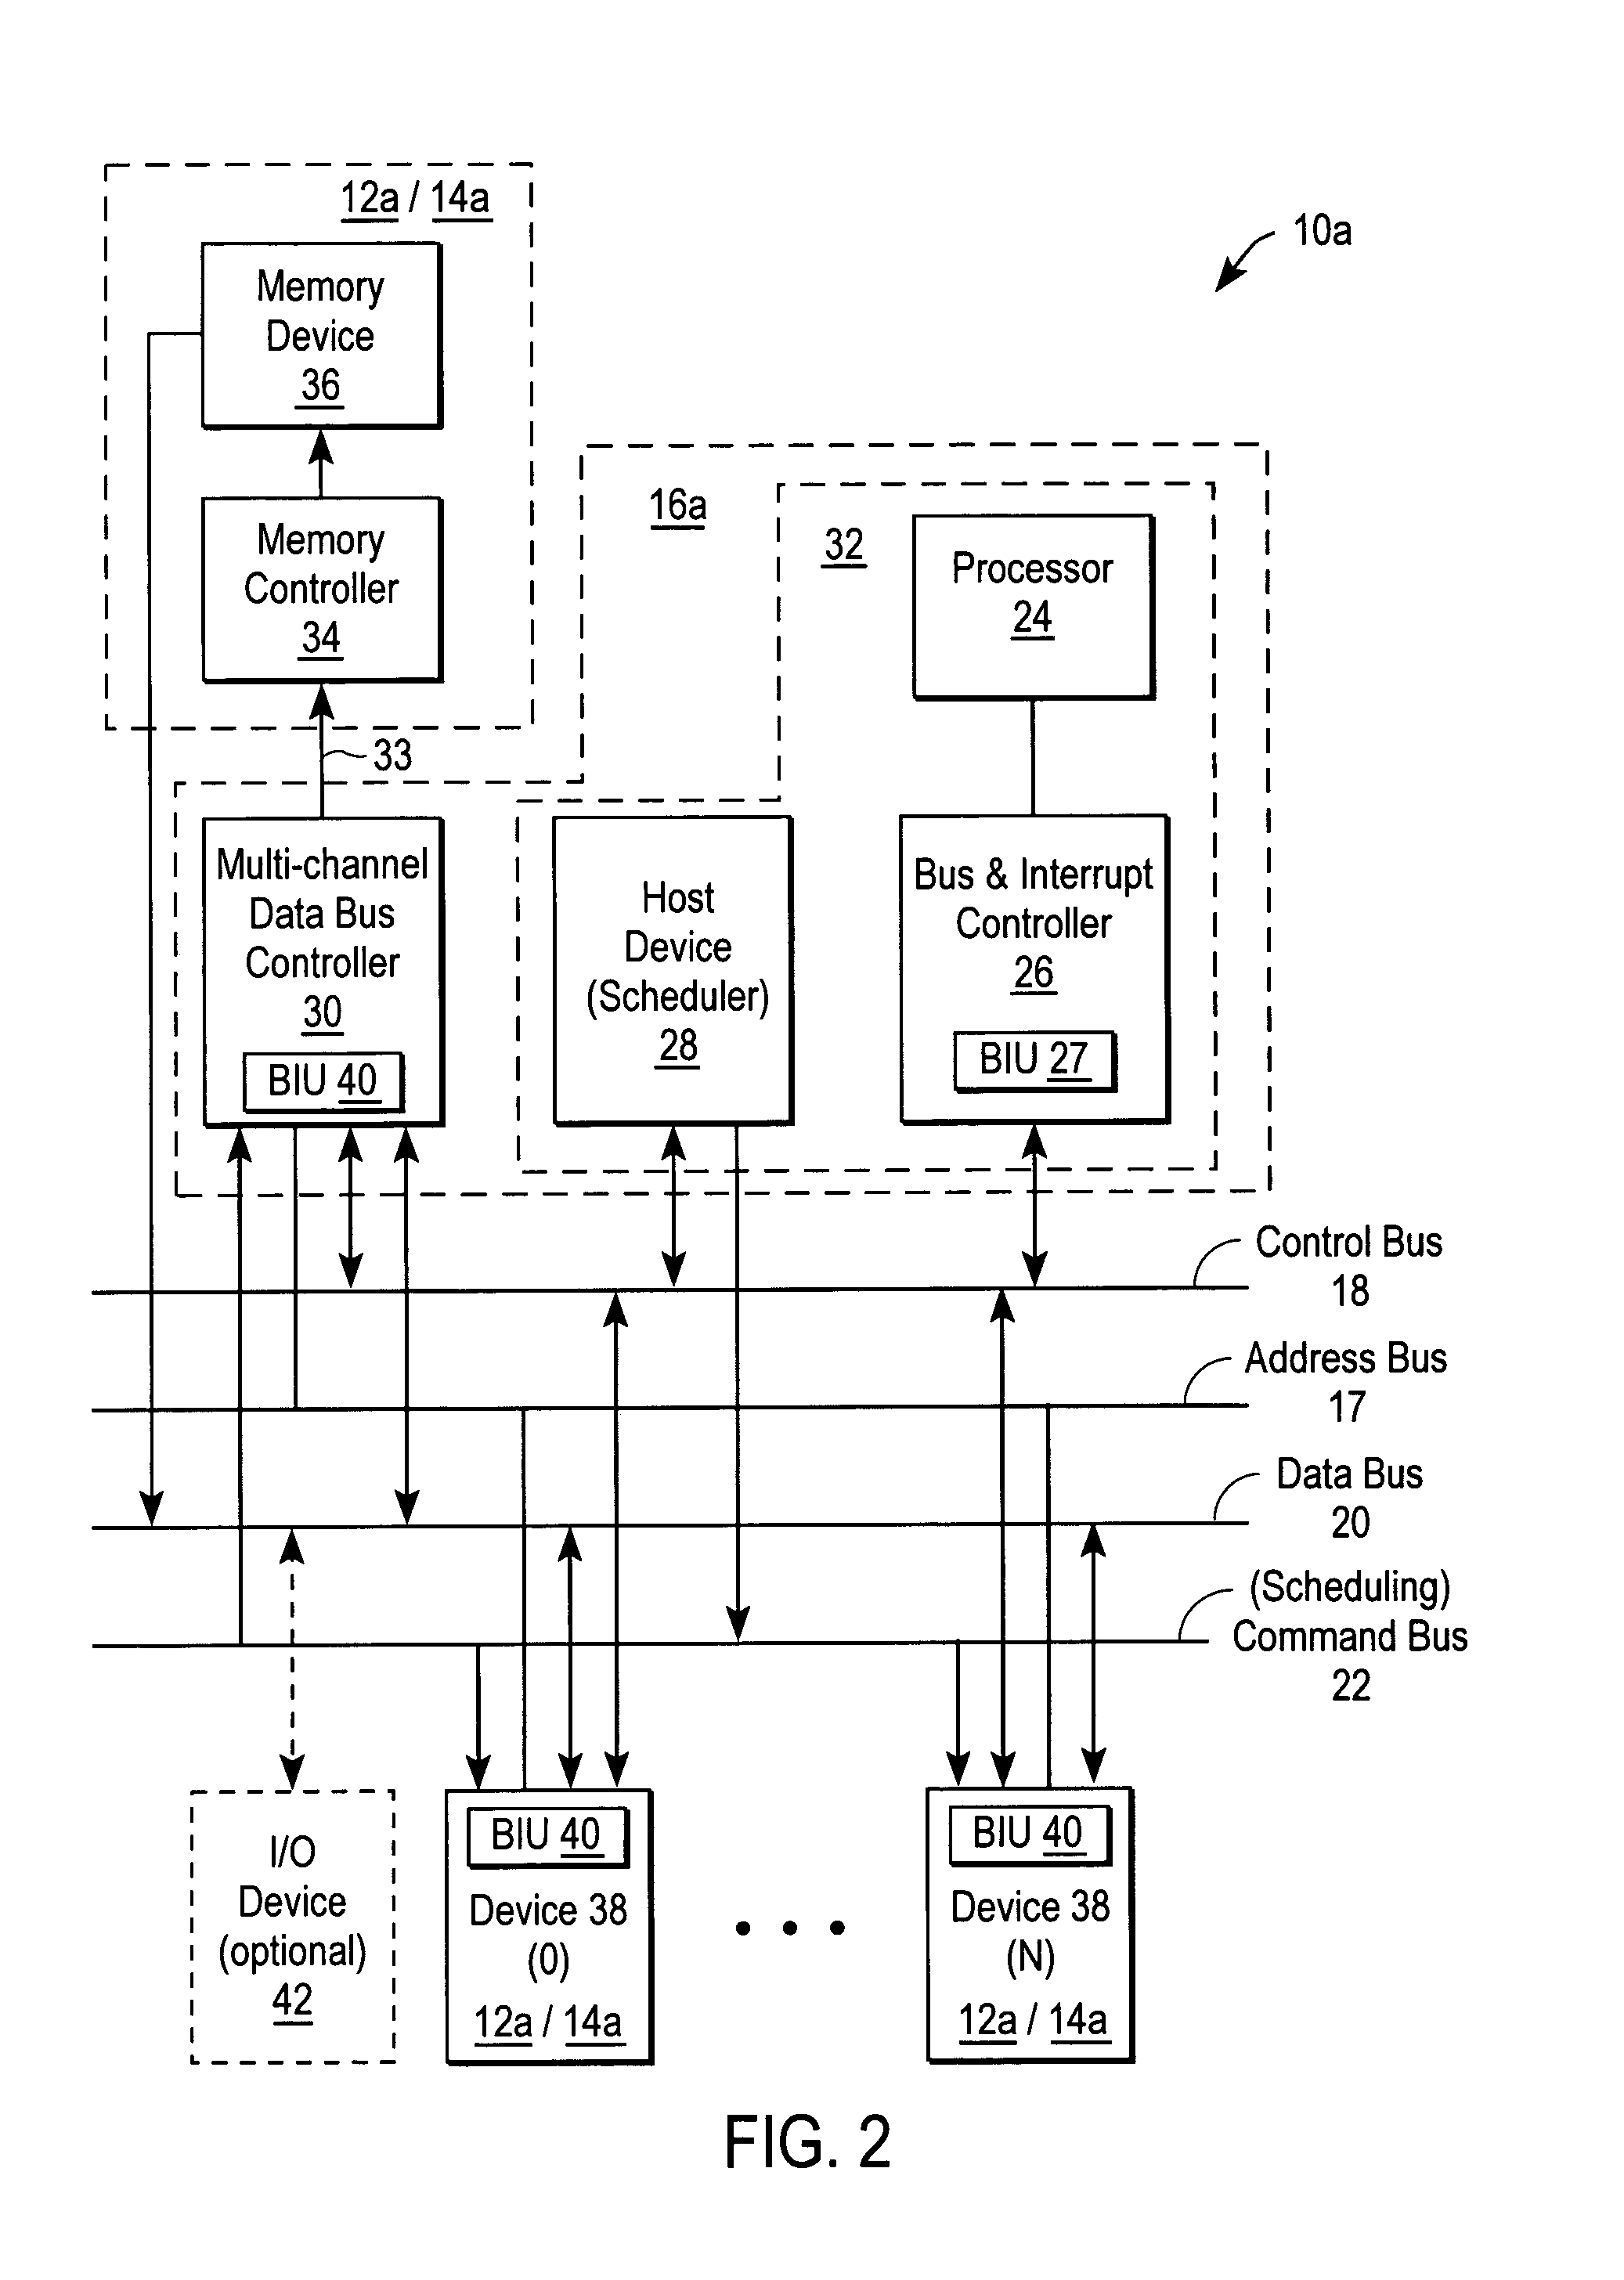 Multiple channel data bus control for video processing